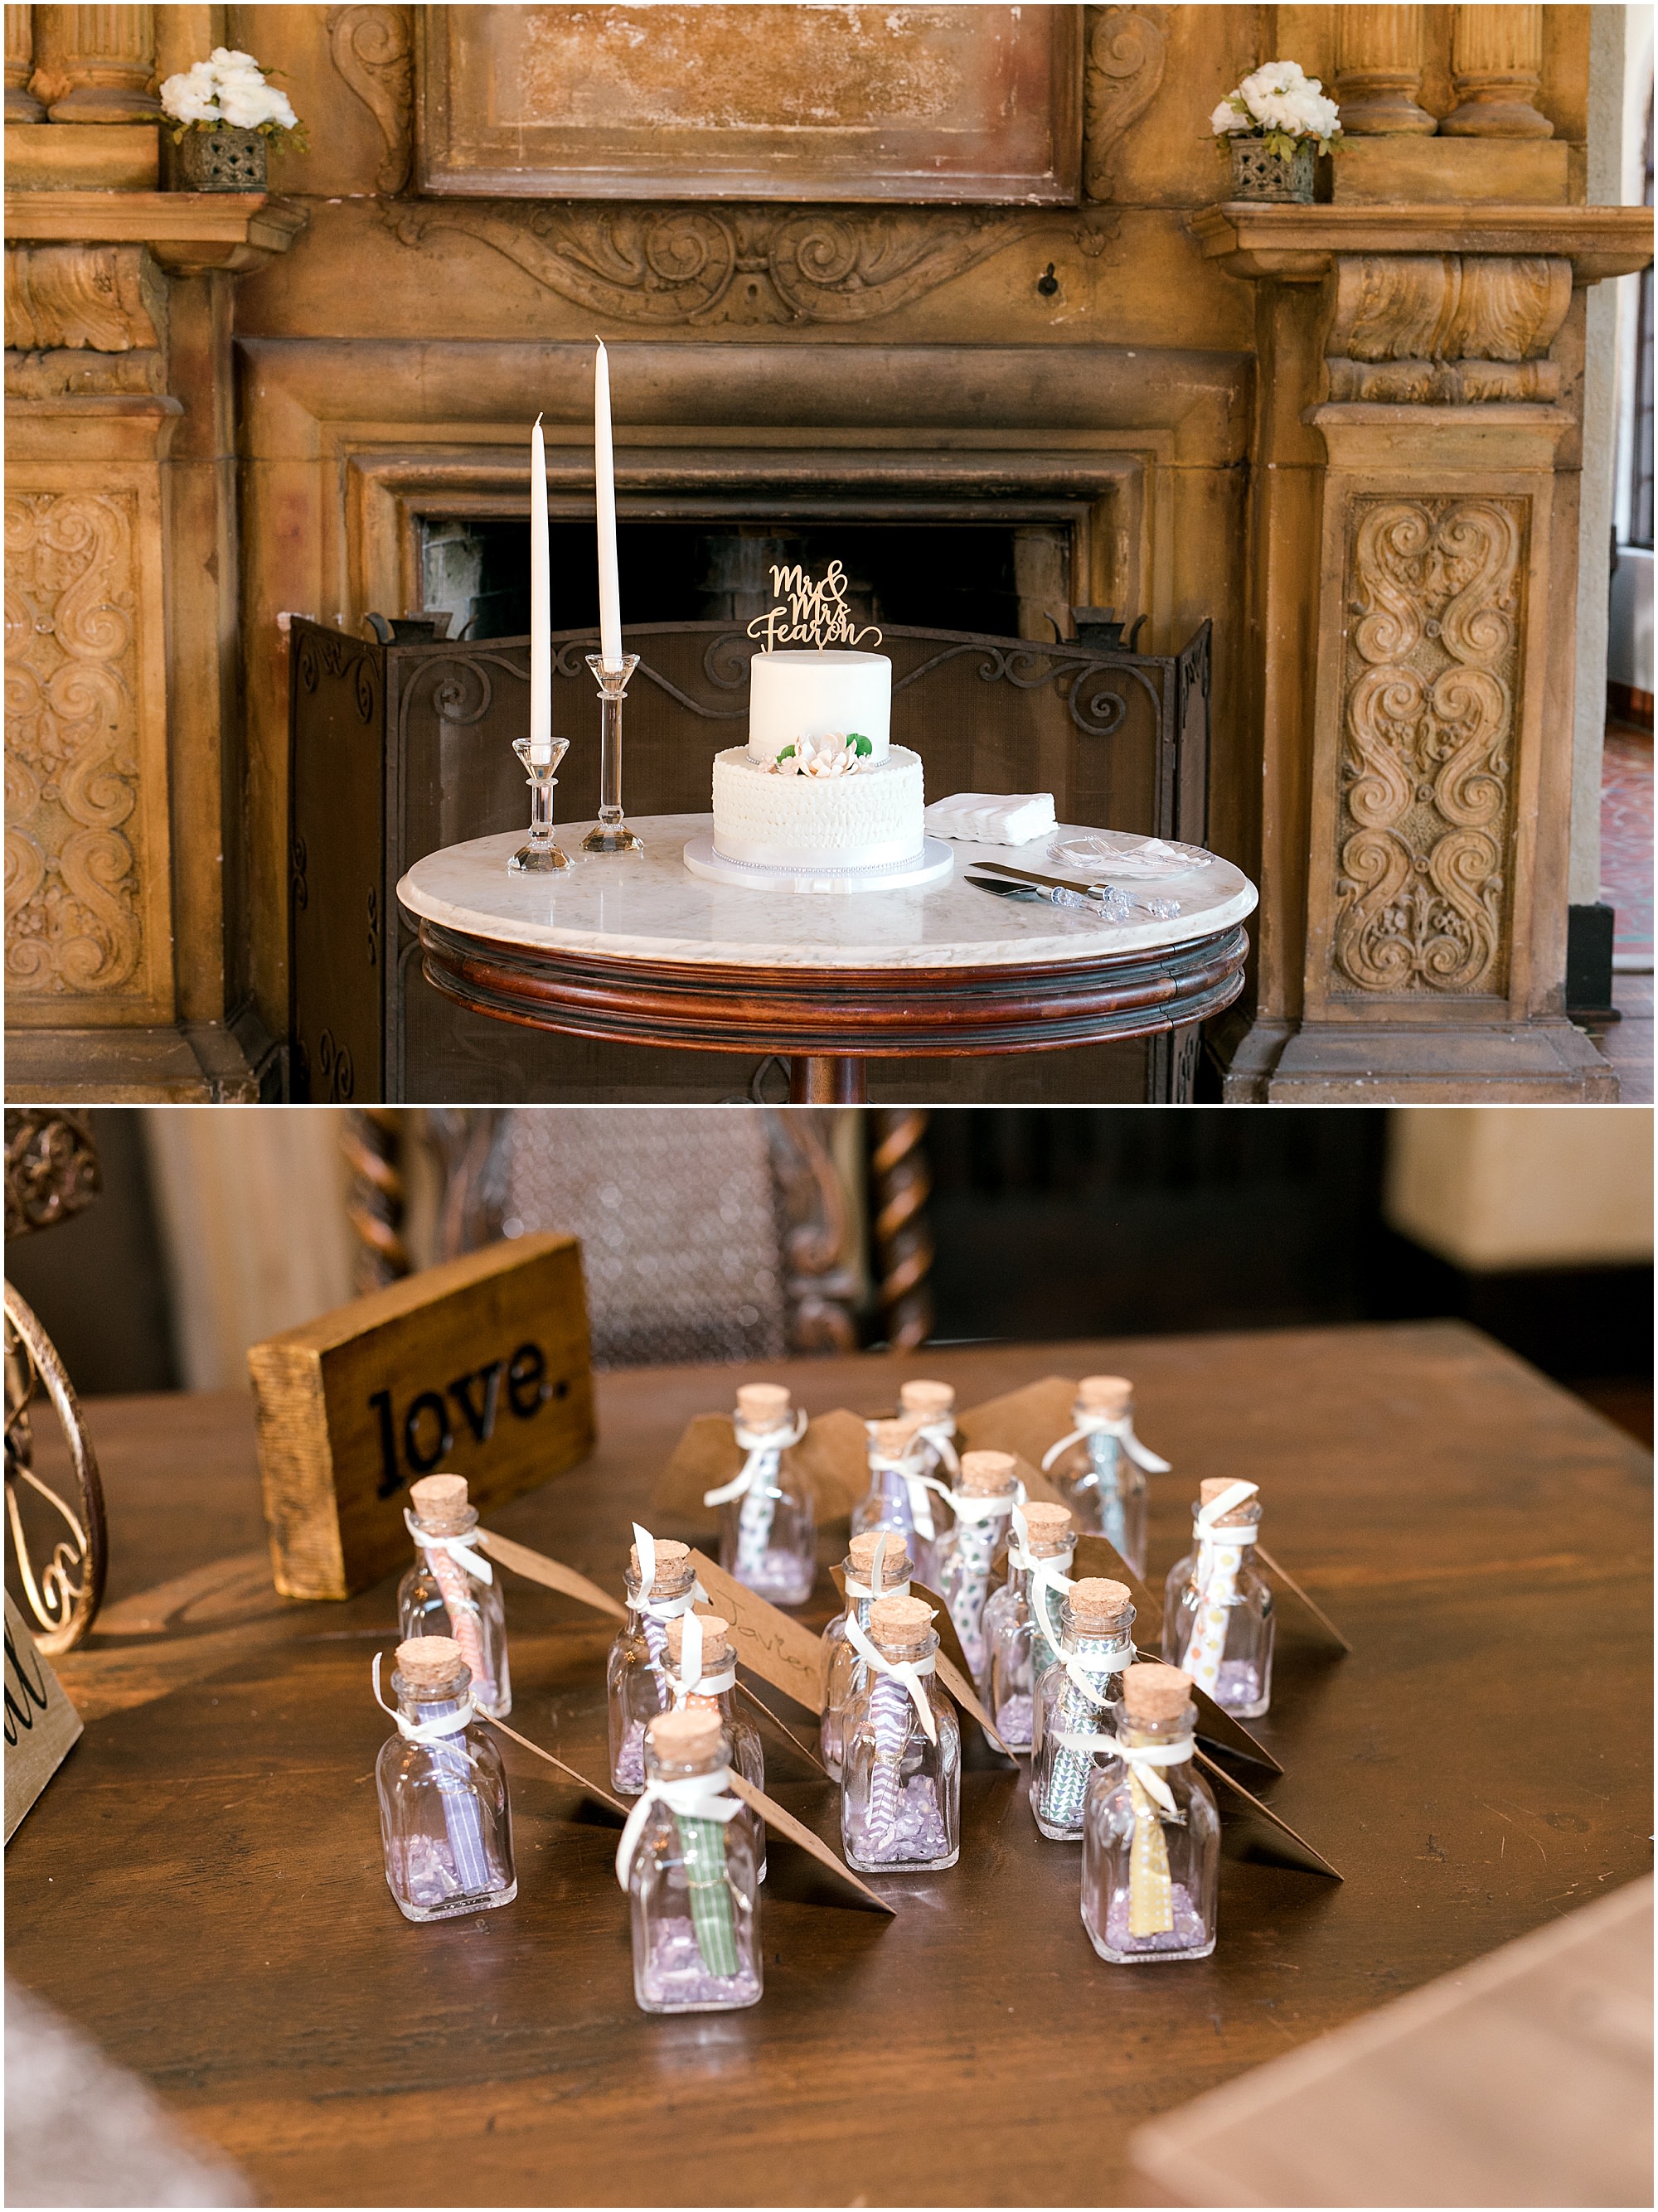 Cake and other details for reception